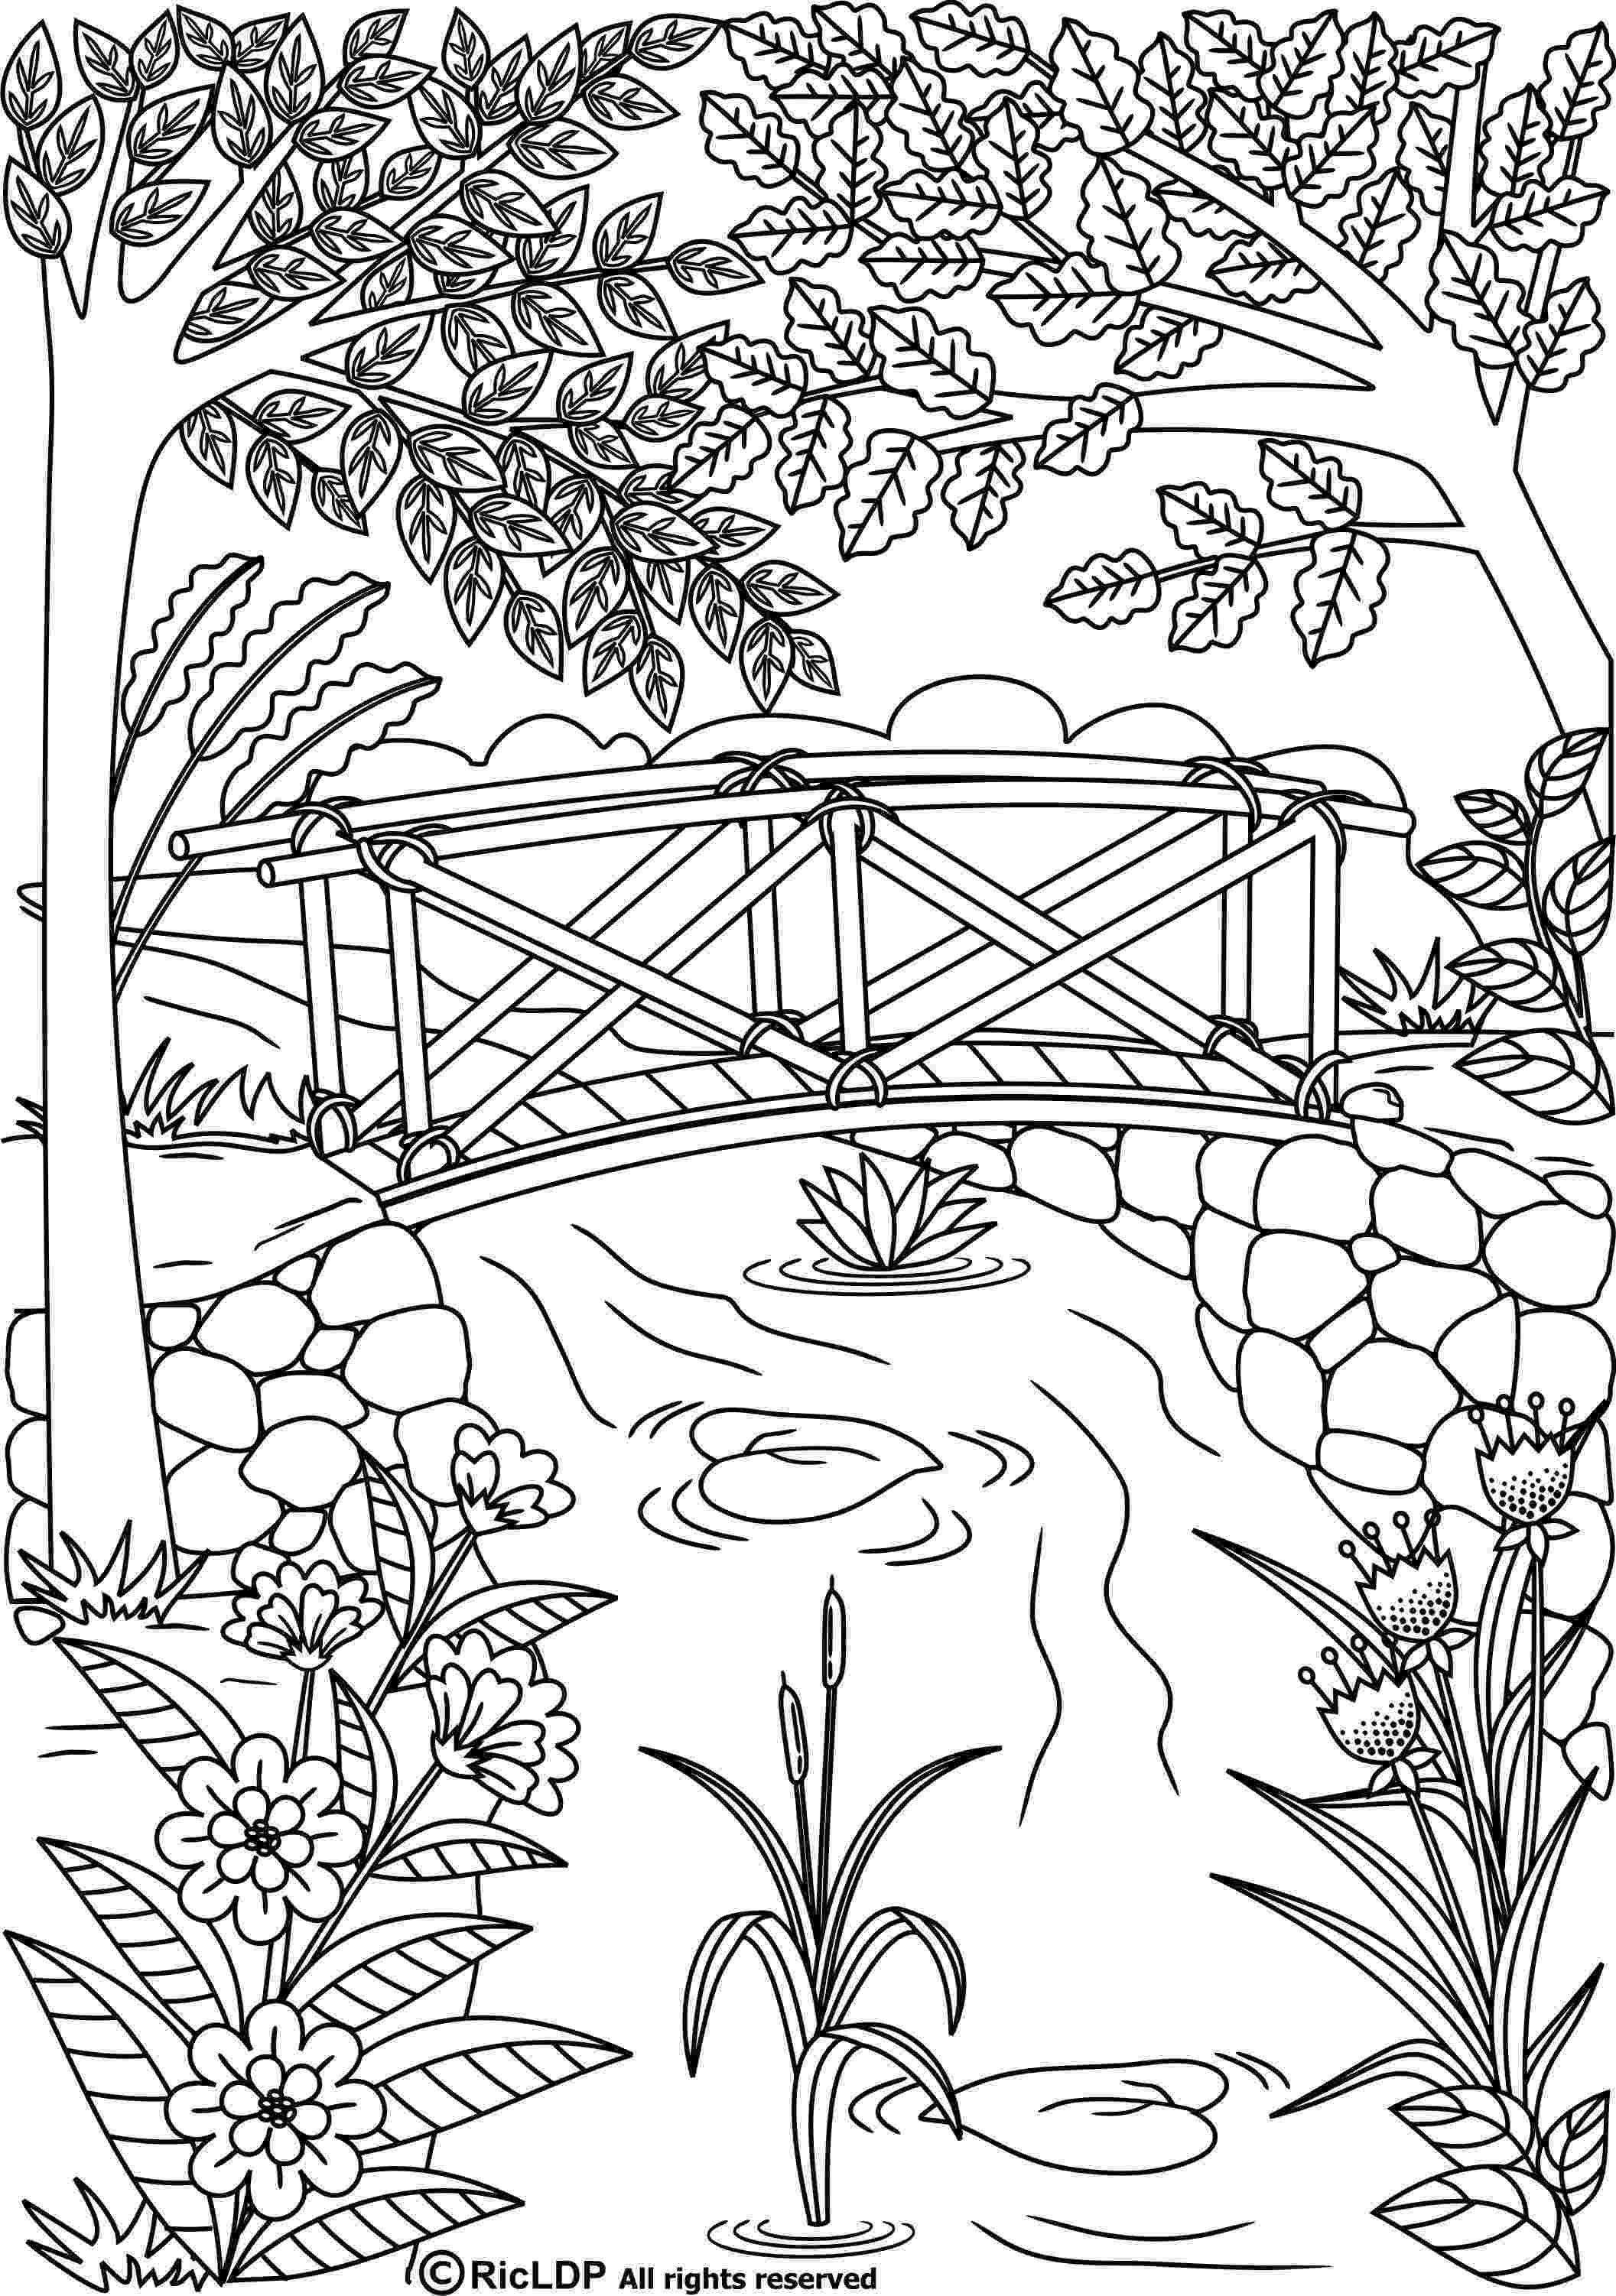 coloring book for grown ups free download coloring book for grown ups pesquisa do google grown for download ups book coloring free 